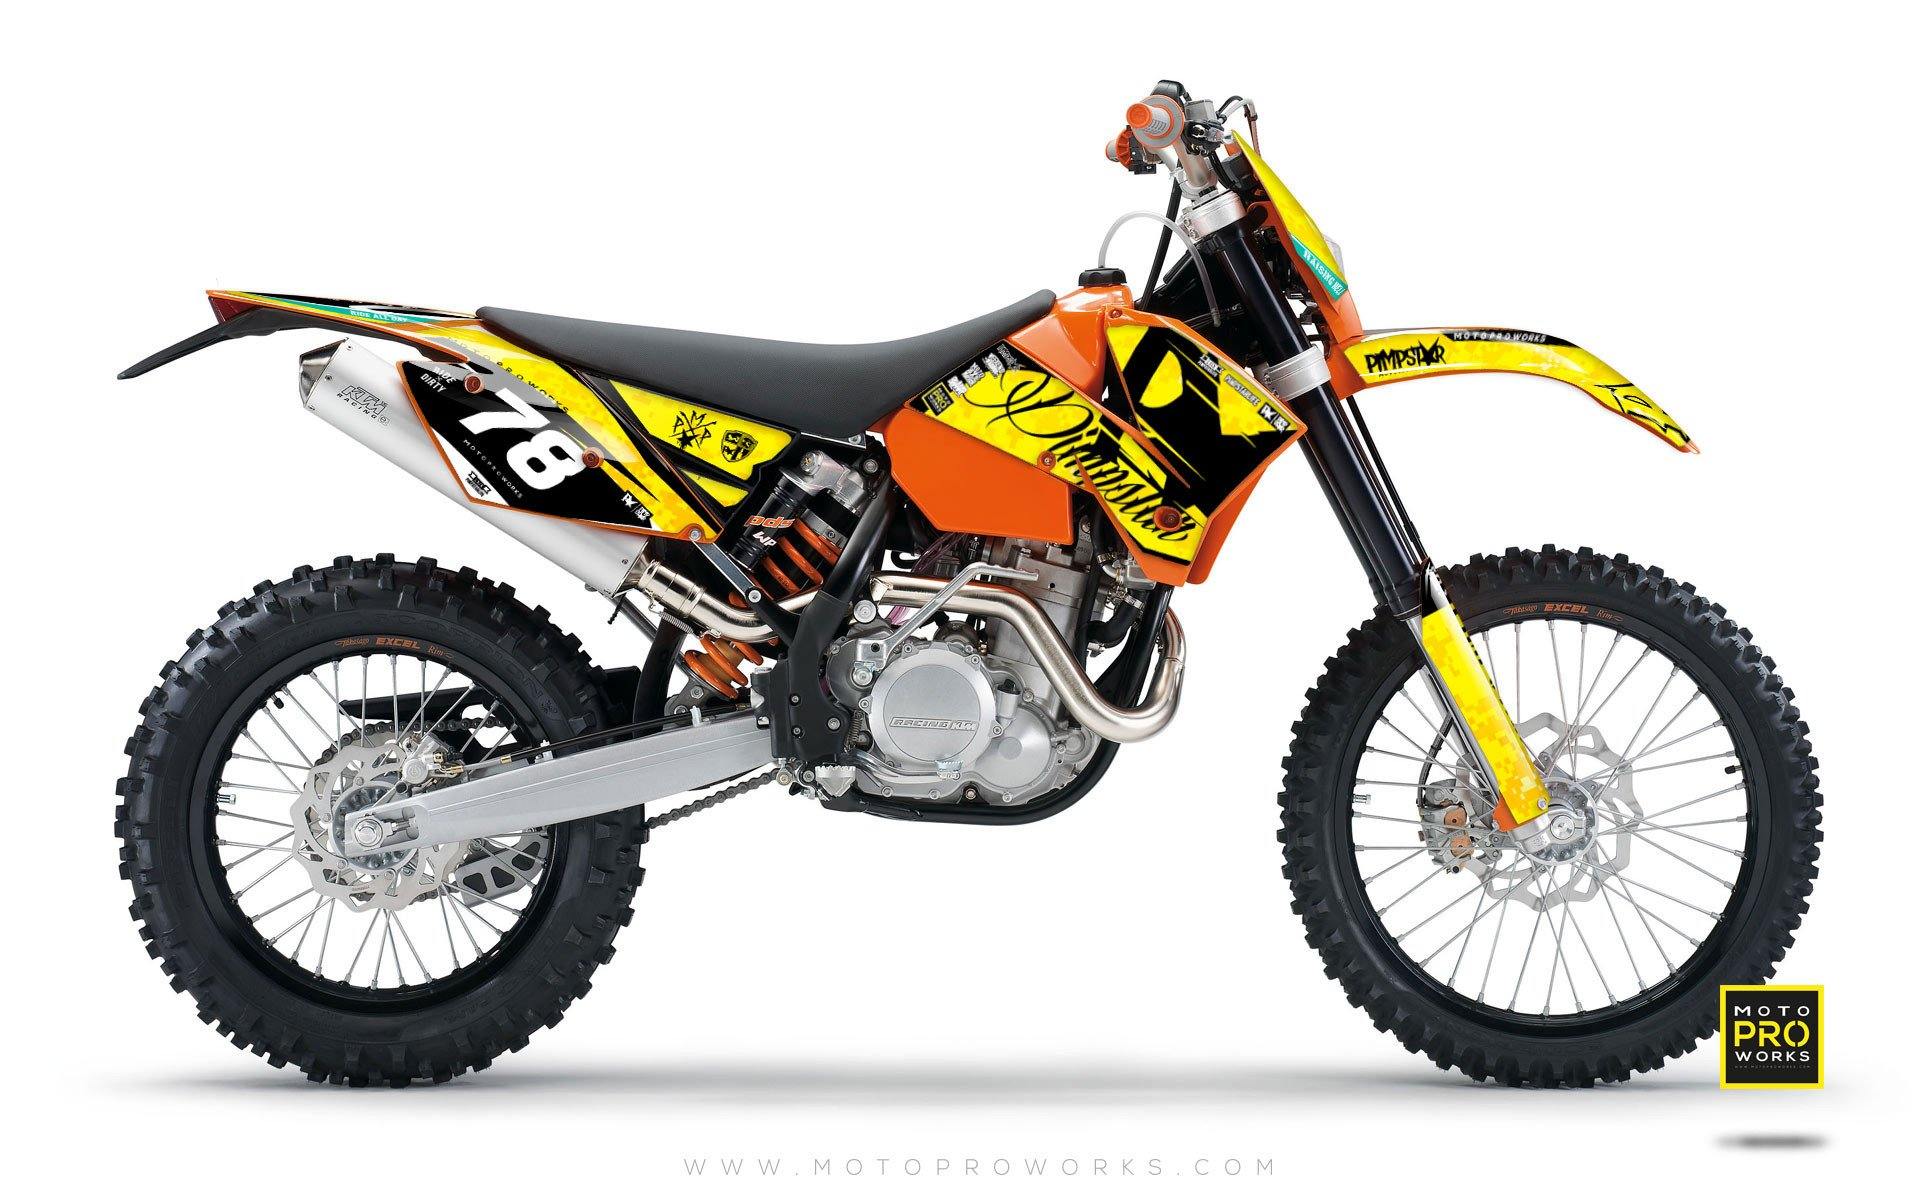 KTM GRAPHIC KIT - "MARPAT" (wasp) - MotoProWorks | Decals and Bike Graphic kit